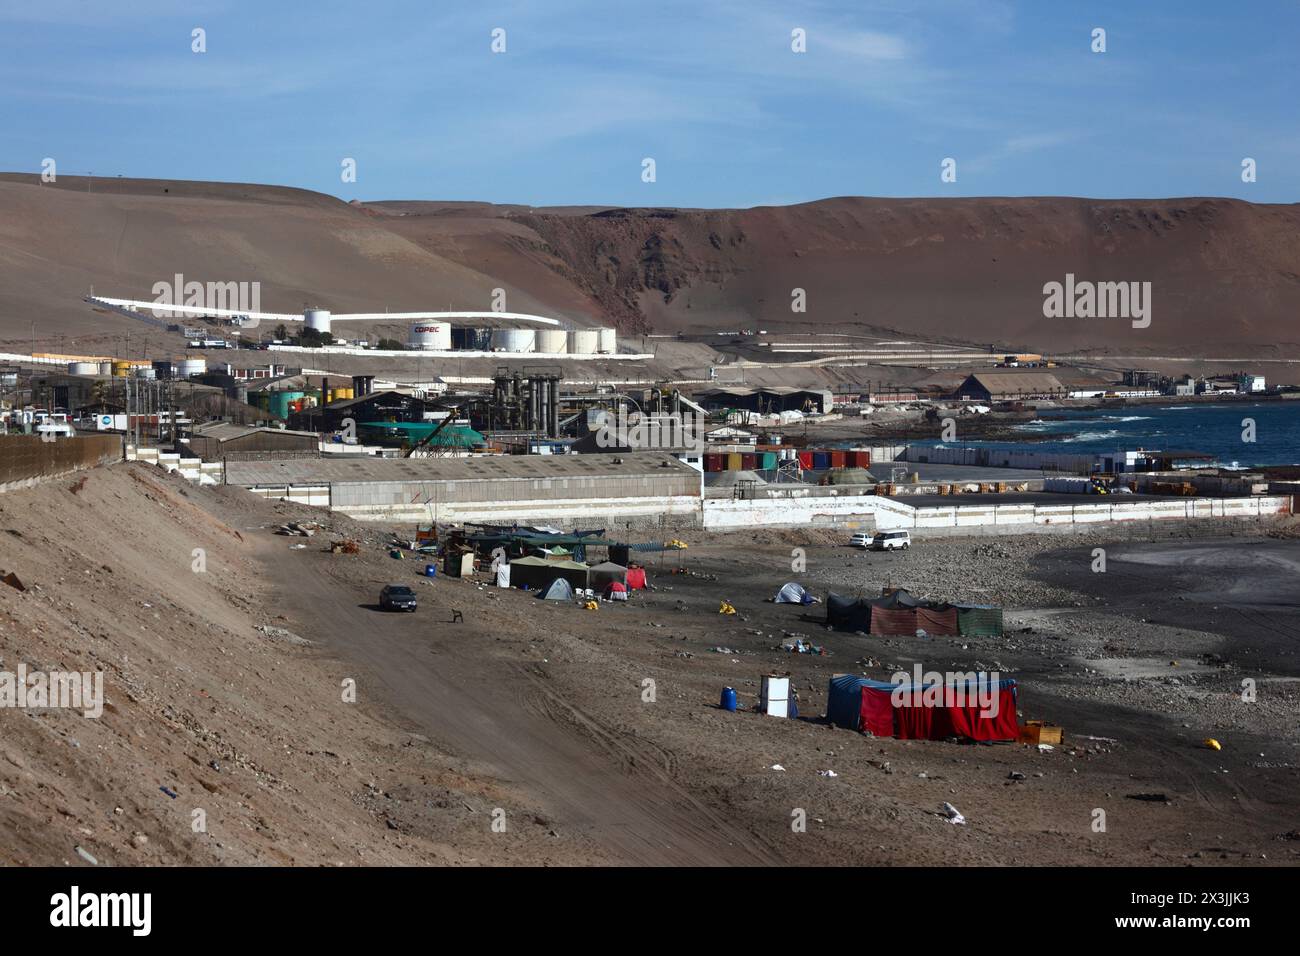 Temporary camps for squatters / homeless / immigrants on Playa Arenillas Negras beach next to Corpesca S.A. fish processing plant, near Arica, Chile Stock Photo